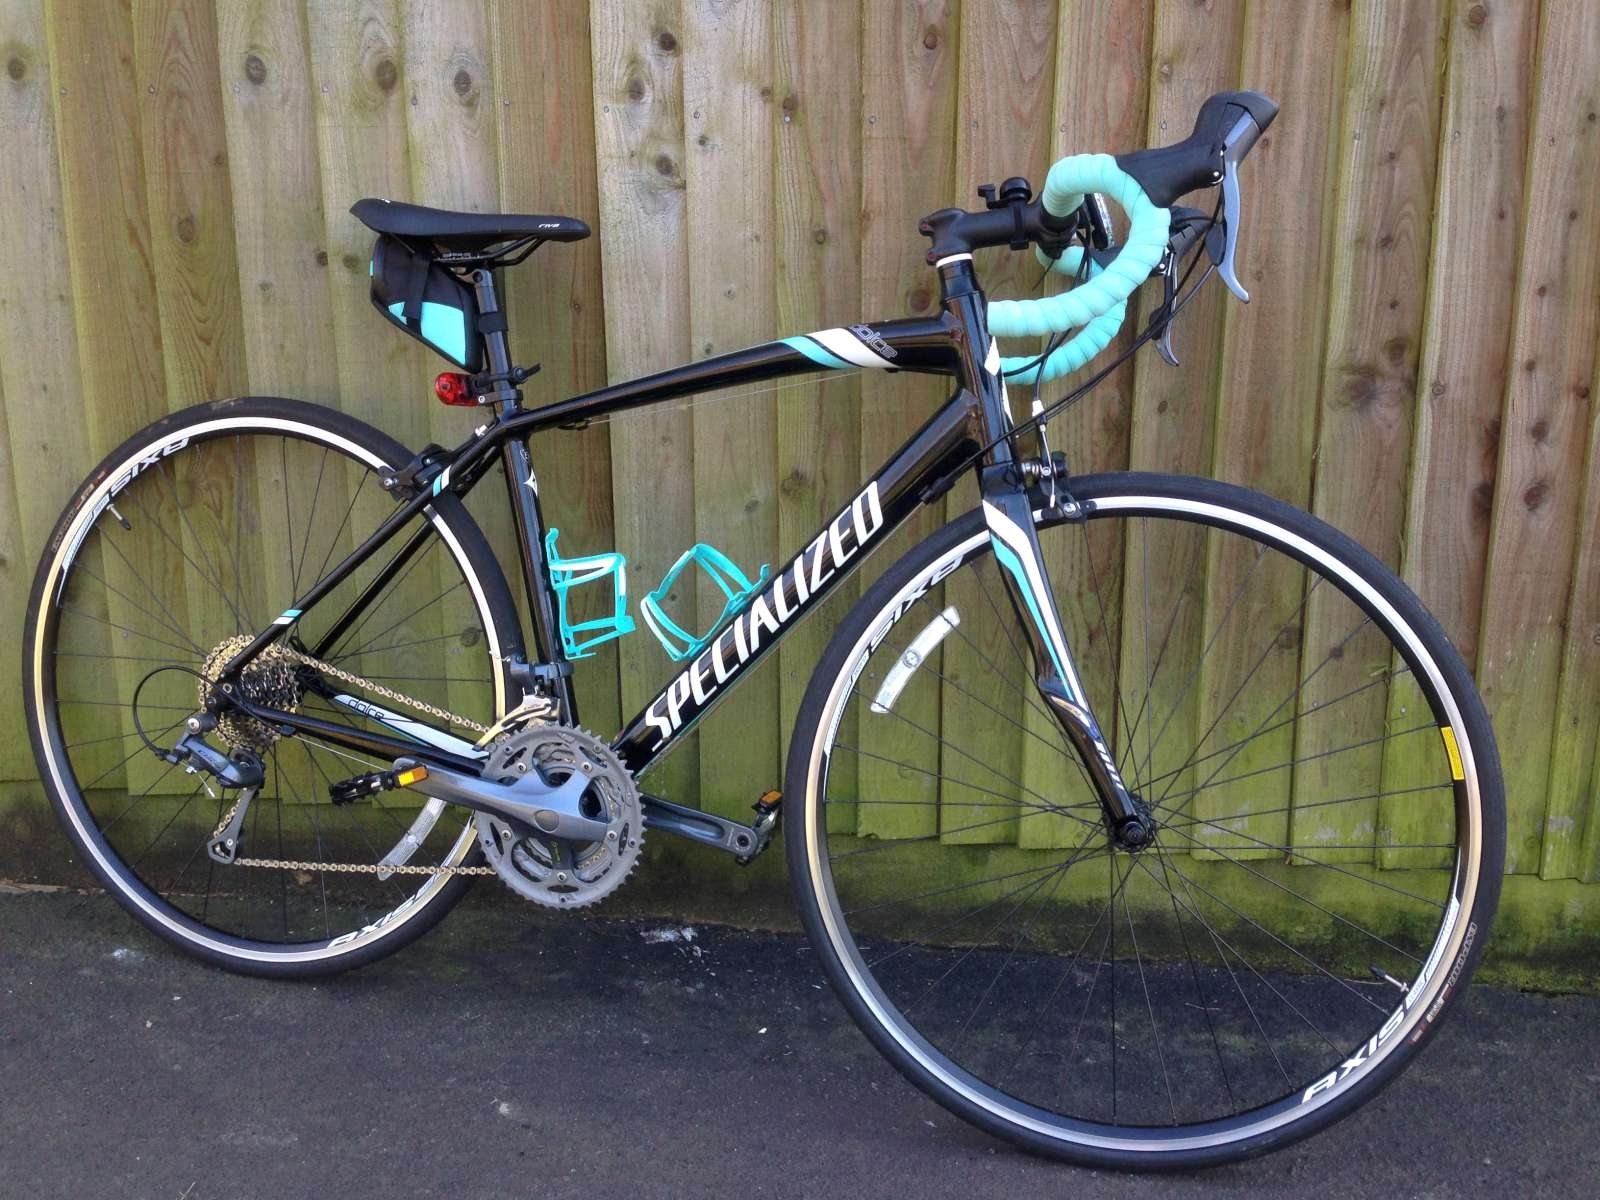 Lot 79 - Specialized Dolce Ladies Bike (2014), 54cm frame, 24 speed, Black and Teal - Sold for £255